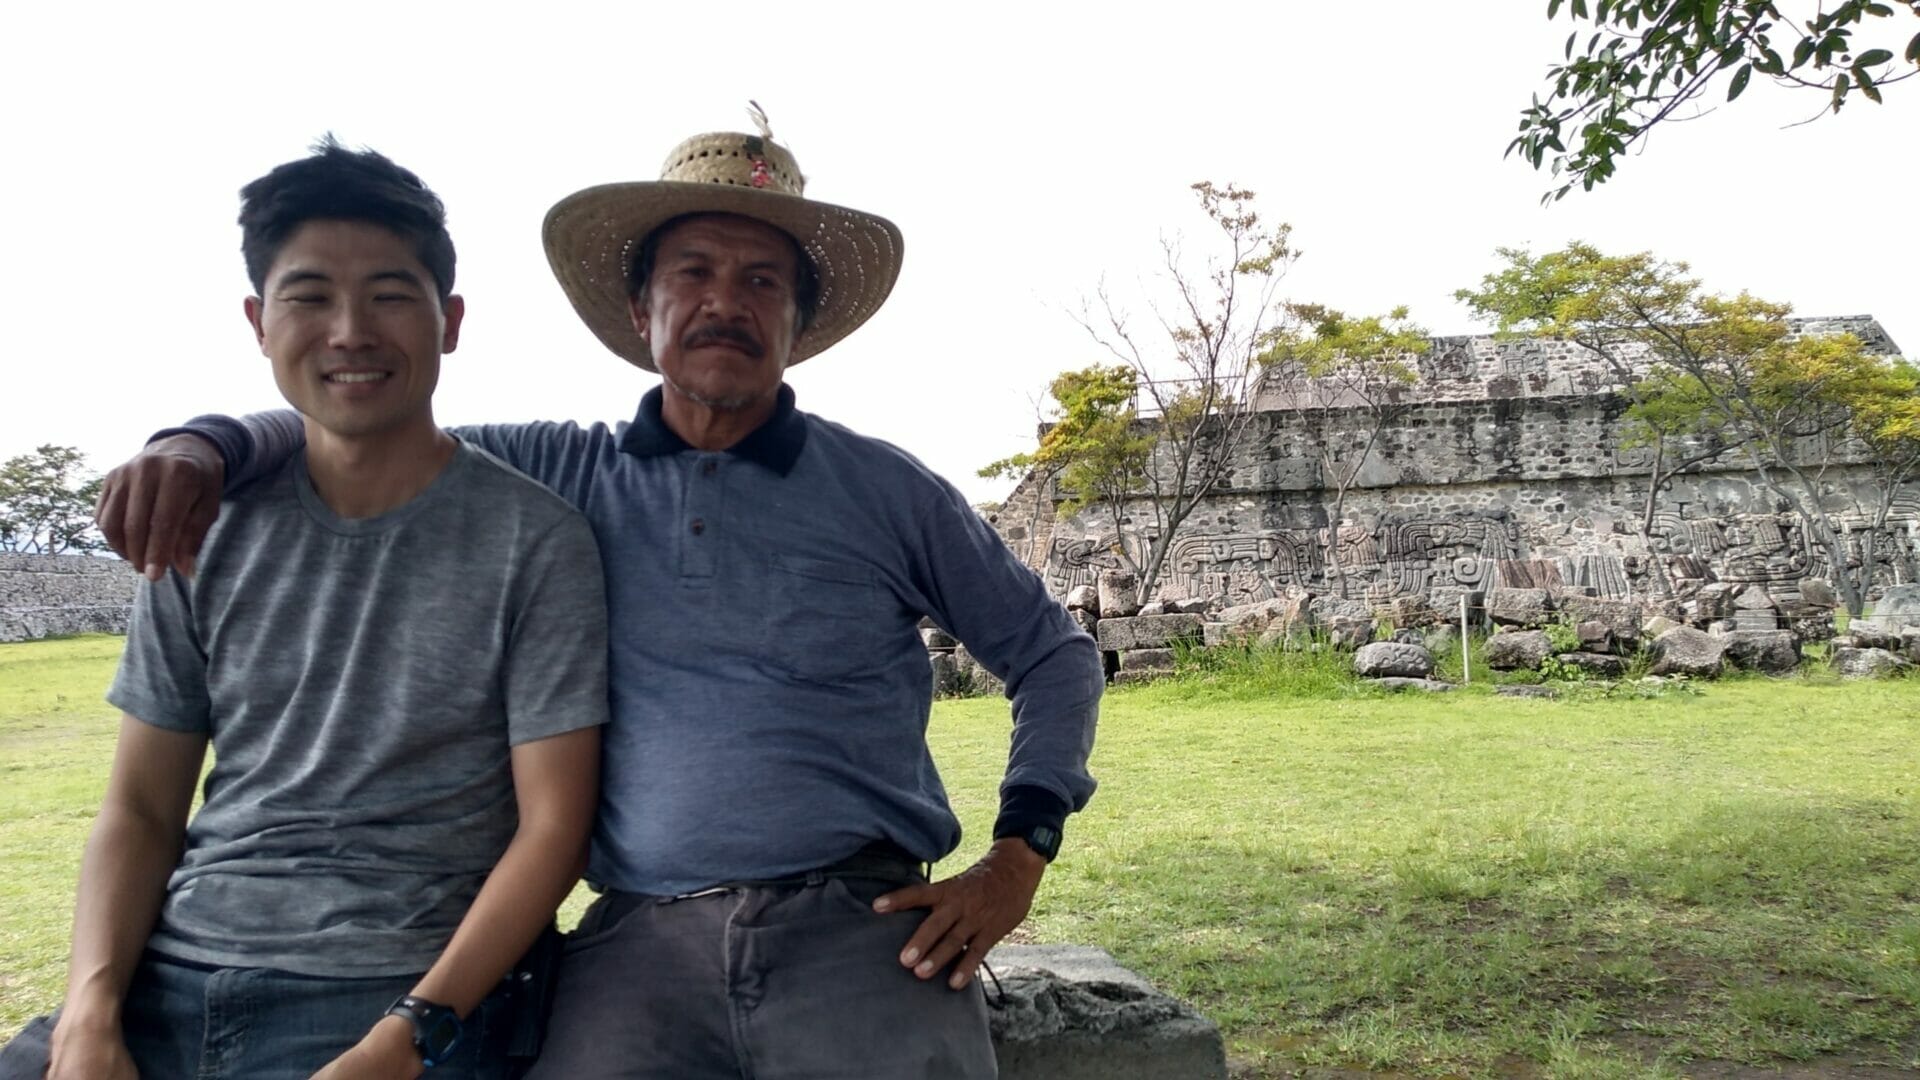 Isao Iwasaki, a Mexican tourist guide, joins hands with locals